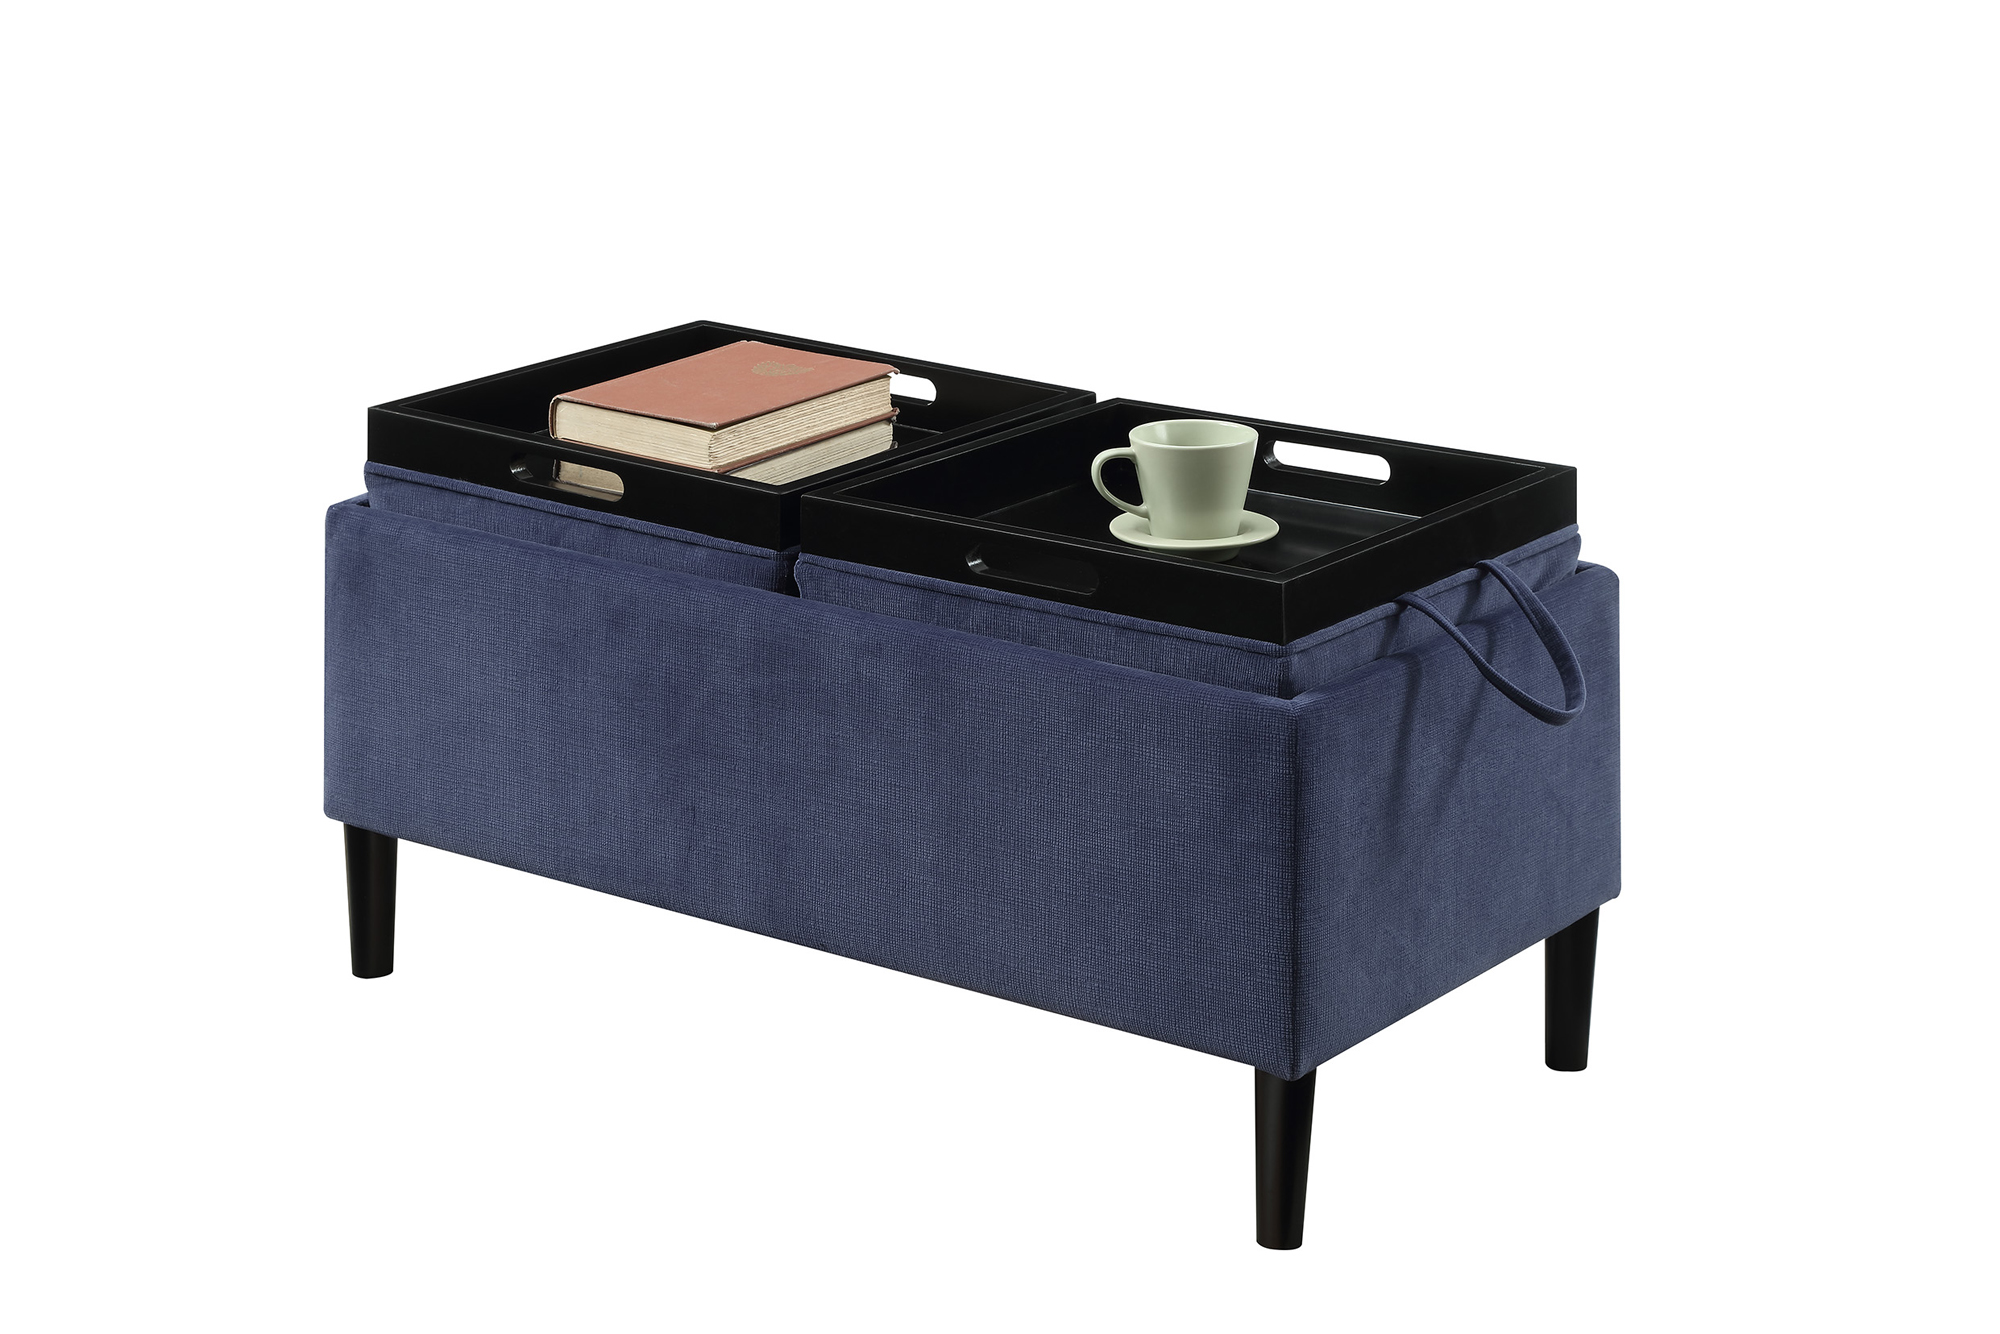 Convenience Concepts Designs4Comfort Magnolia Storage Ottoman with Reversible Trays, Dark Blue Corduroy - image 2 of 4